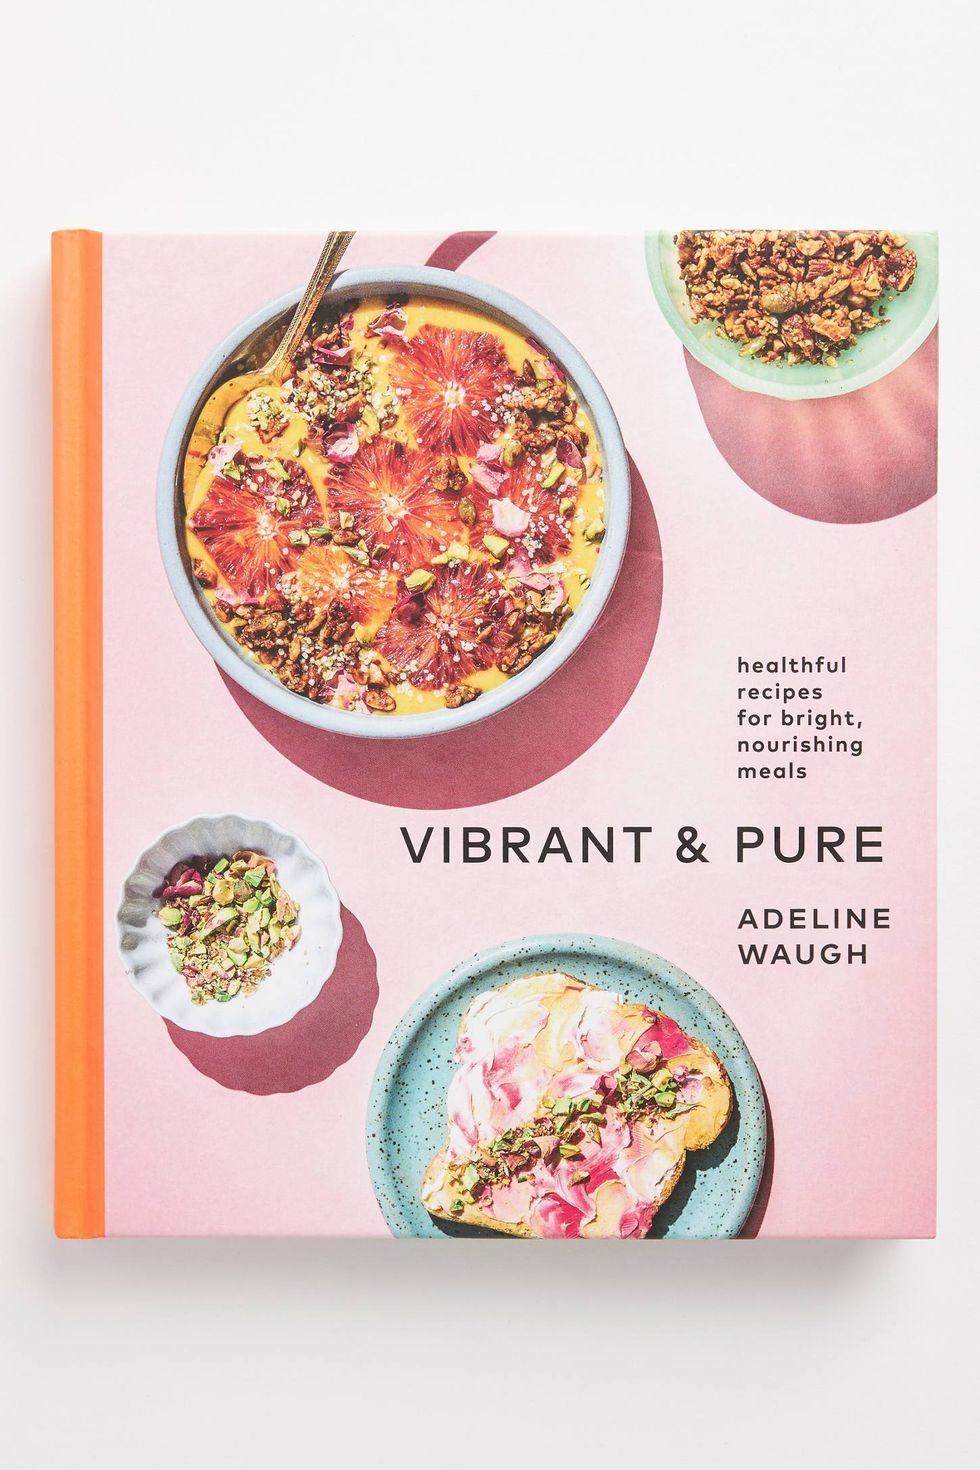 Vibrant & Pure: Healthful Recipes for Bright, Nourishing Meals